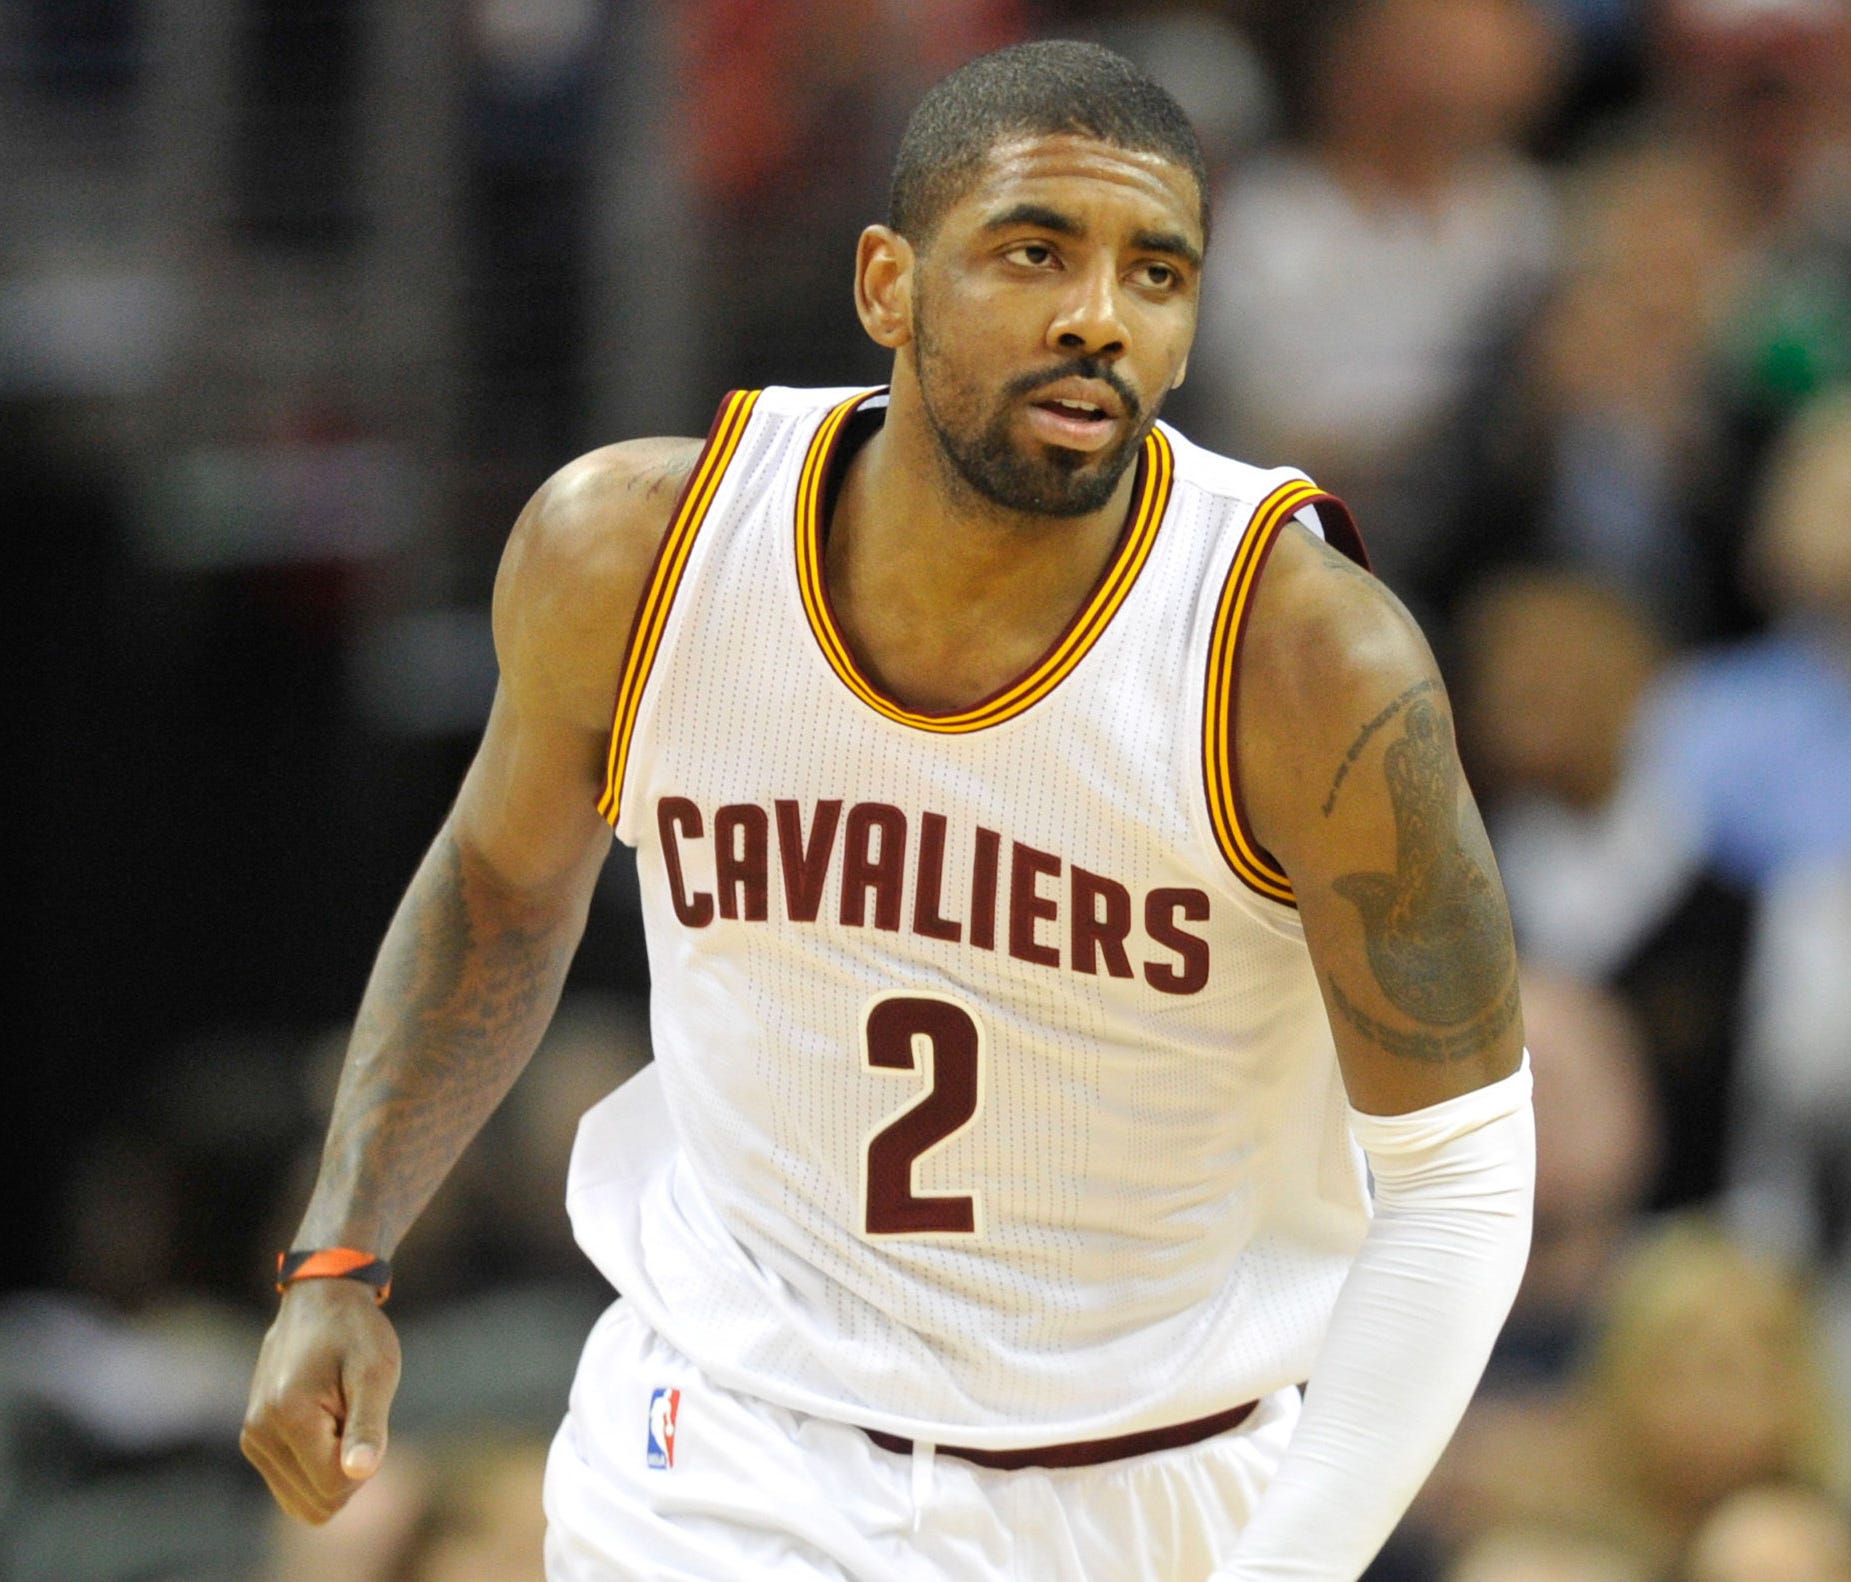 Cleveland Cavaliers guard Kyrie Irving reacts against the Dallas Mavericks at Quicken Loans Arena.